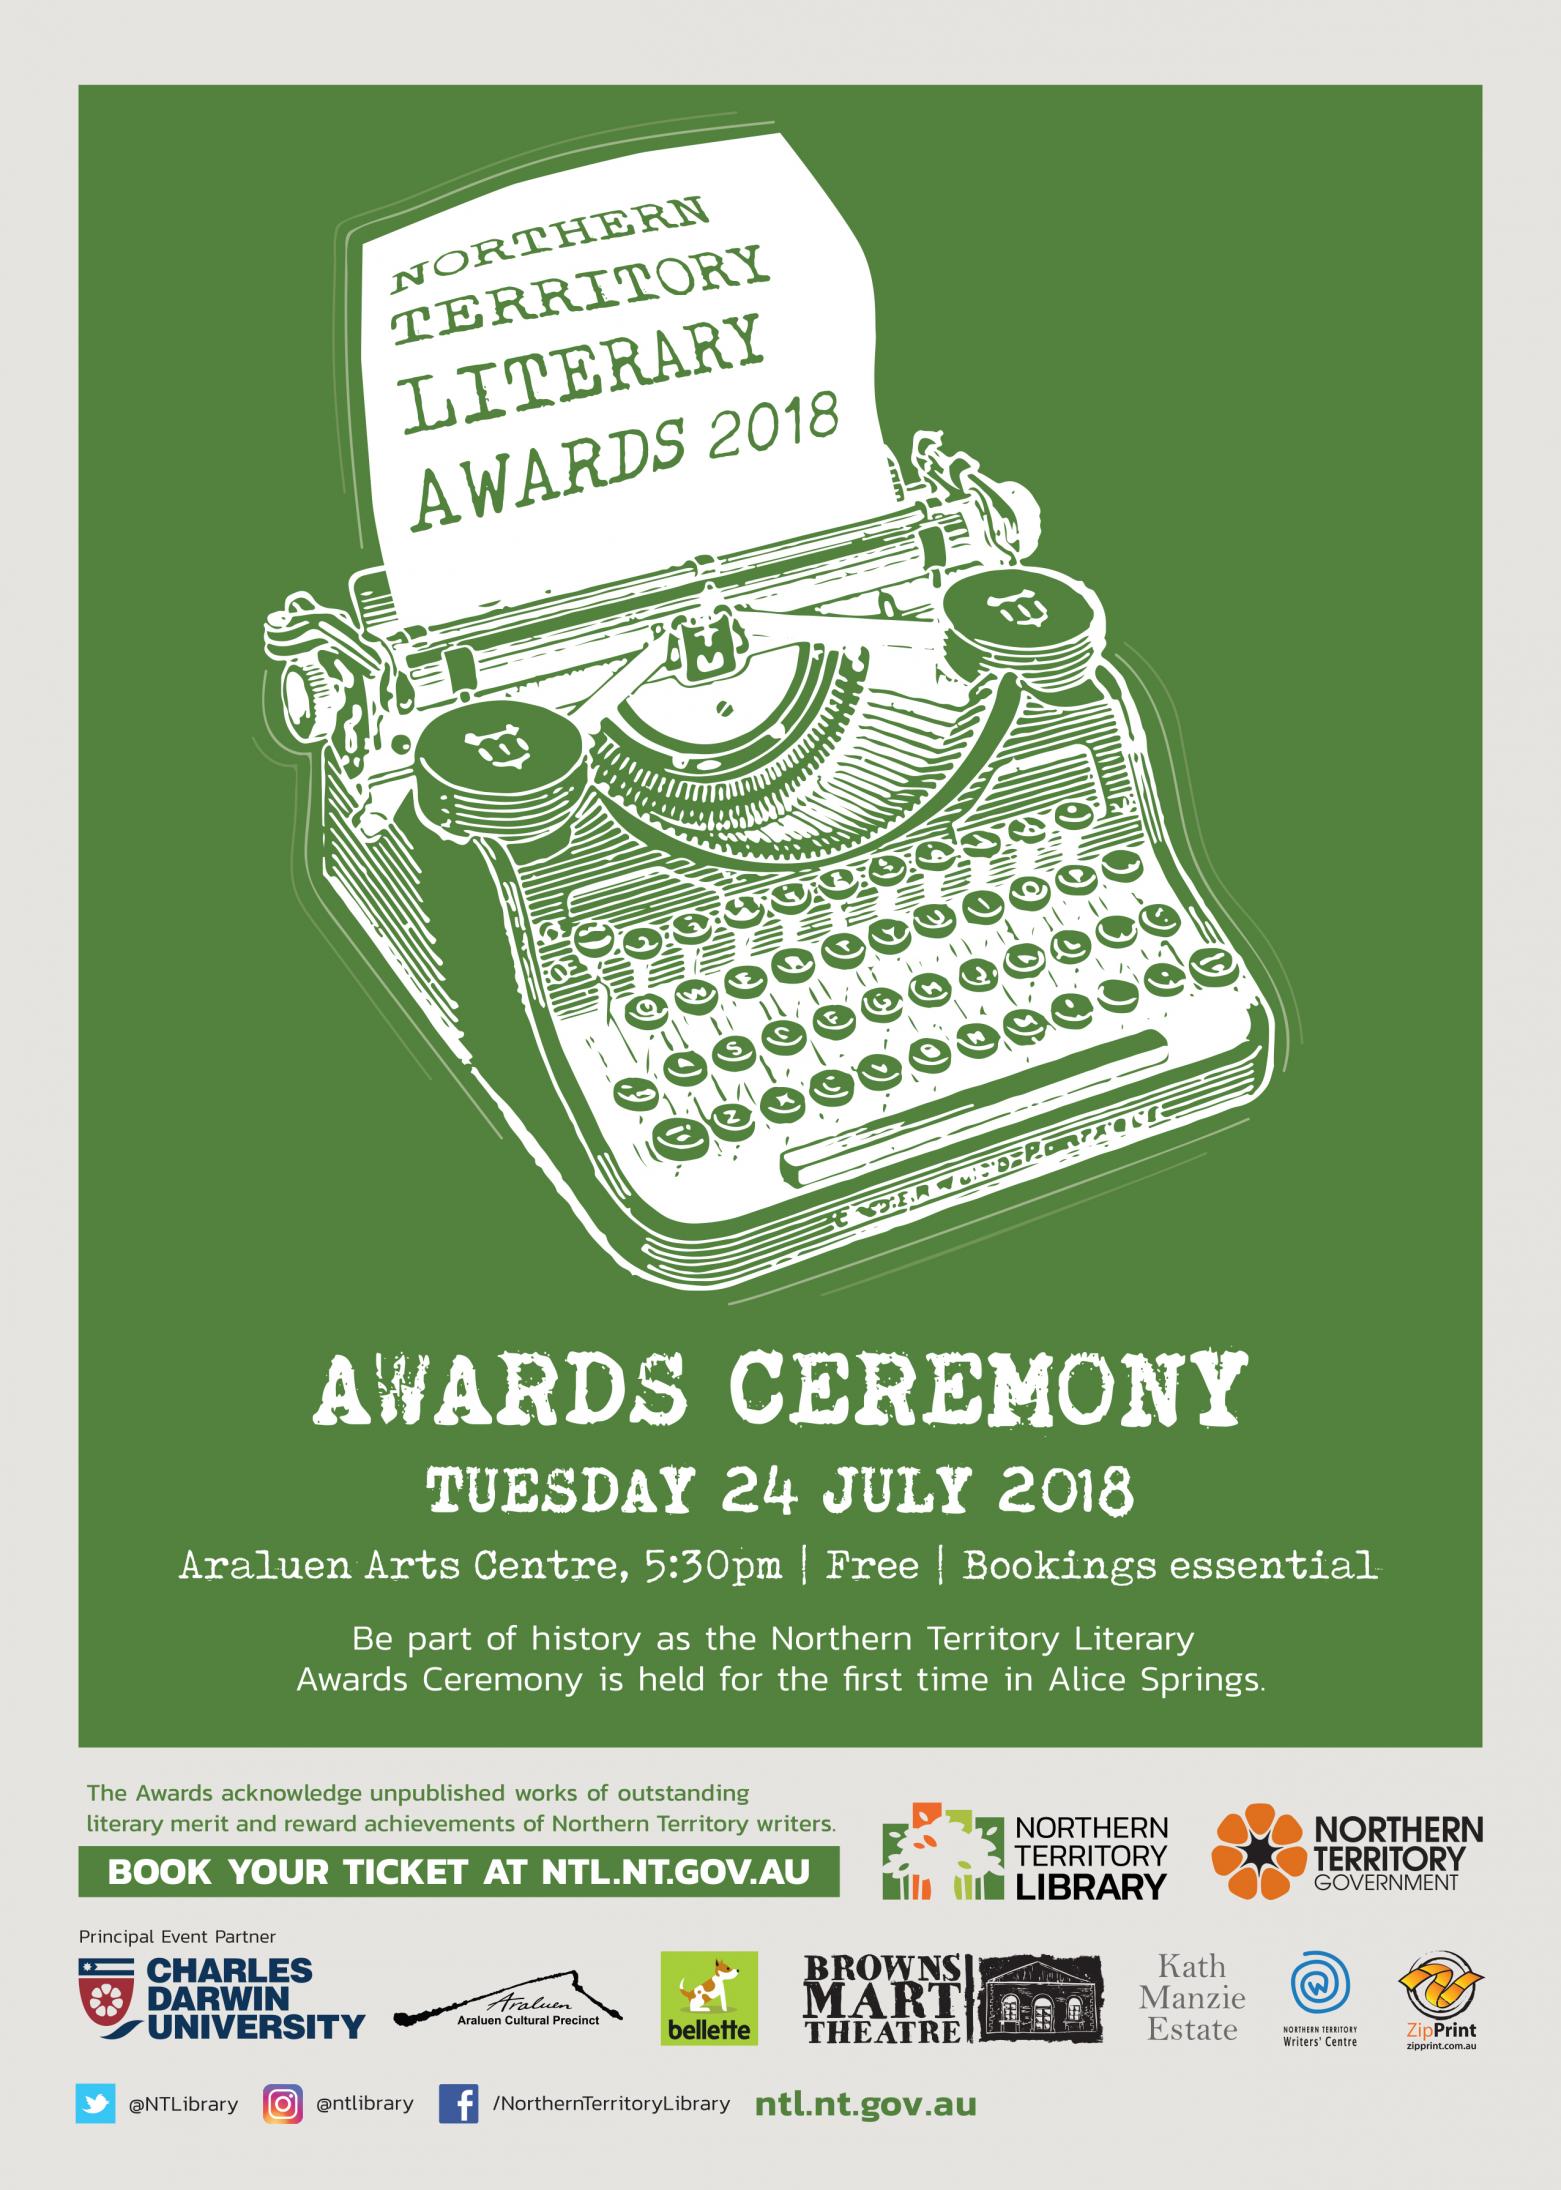 Green poster promoting the Northern Territory Literary Awards